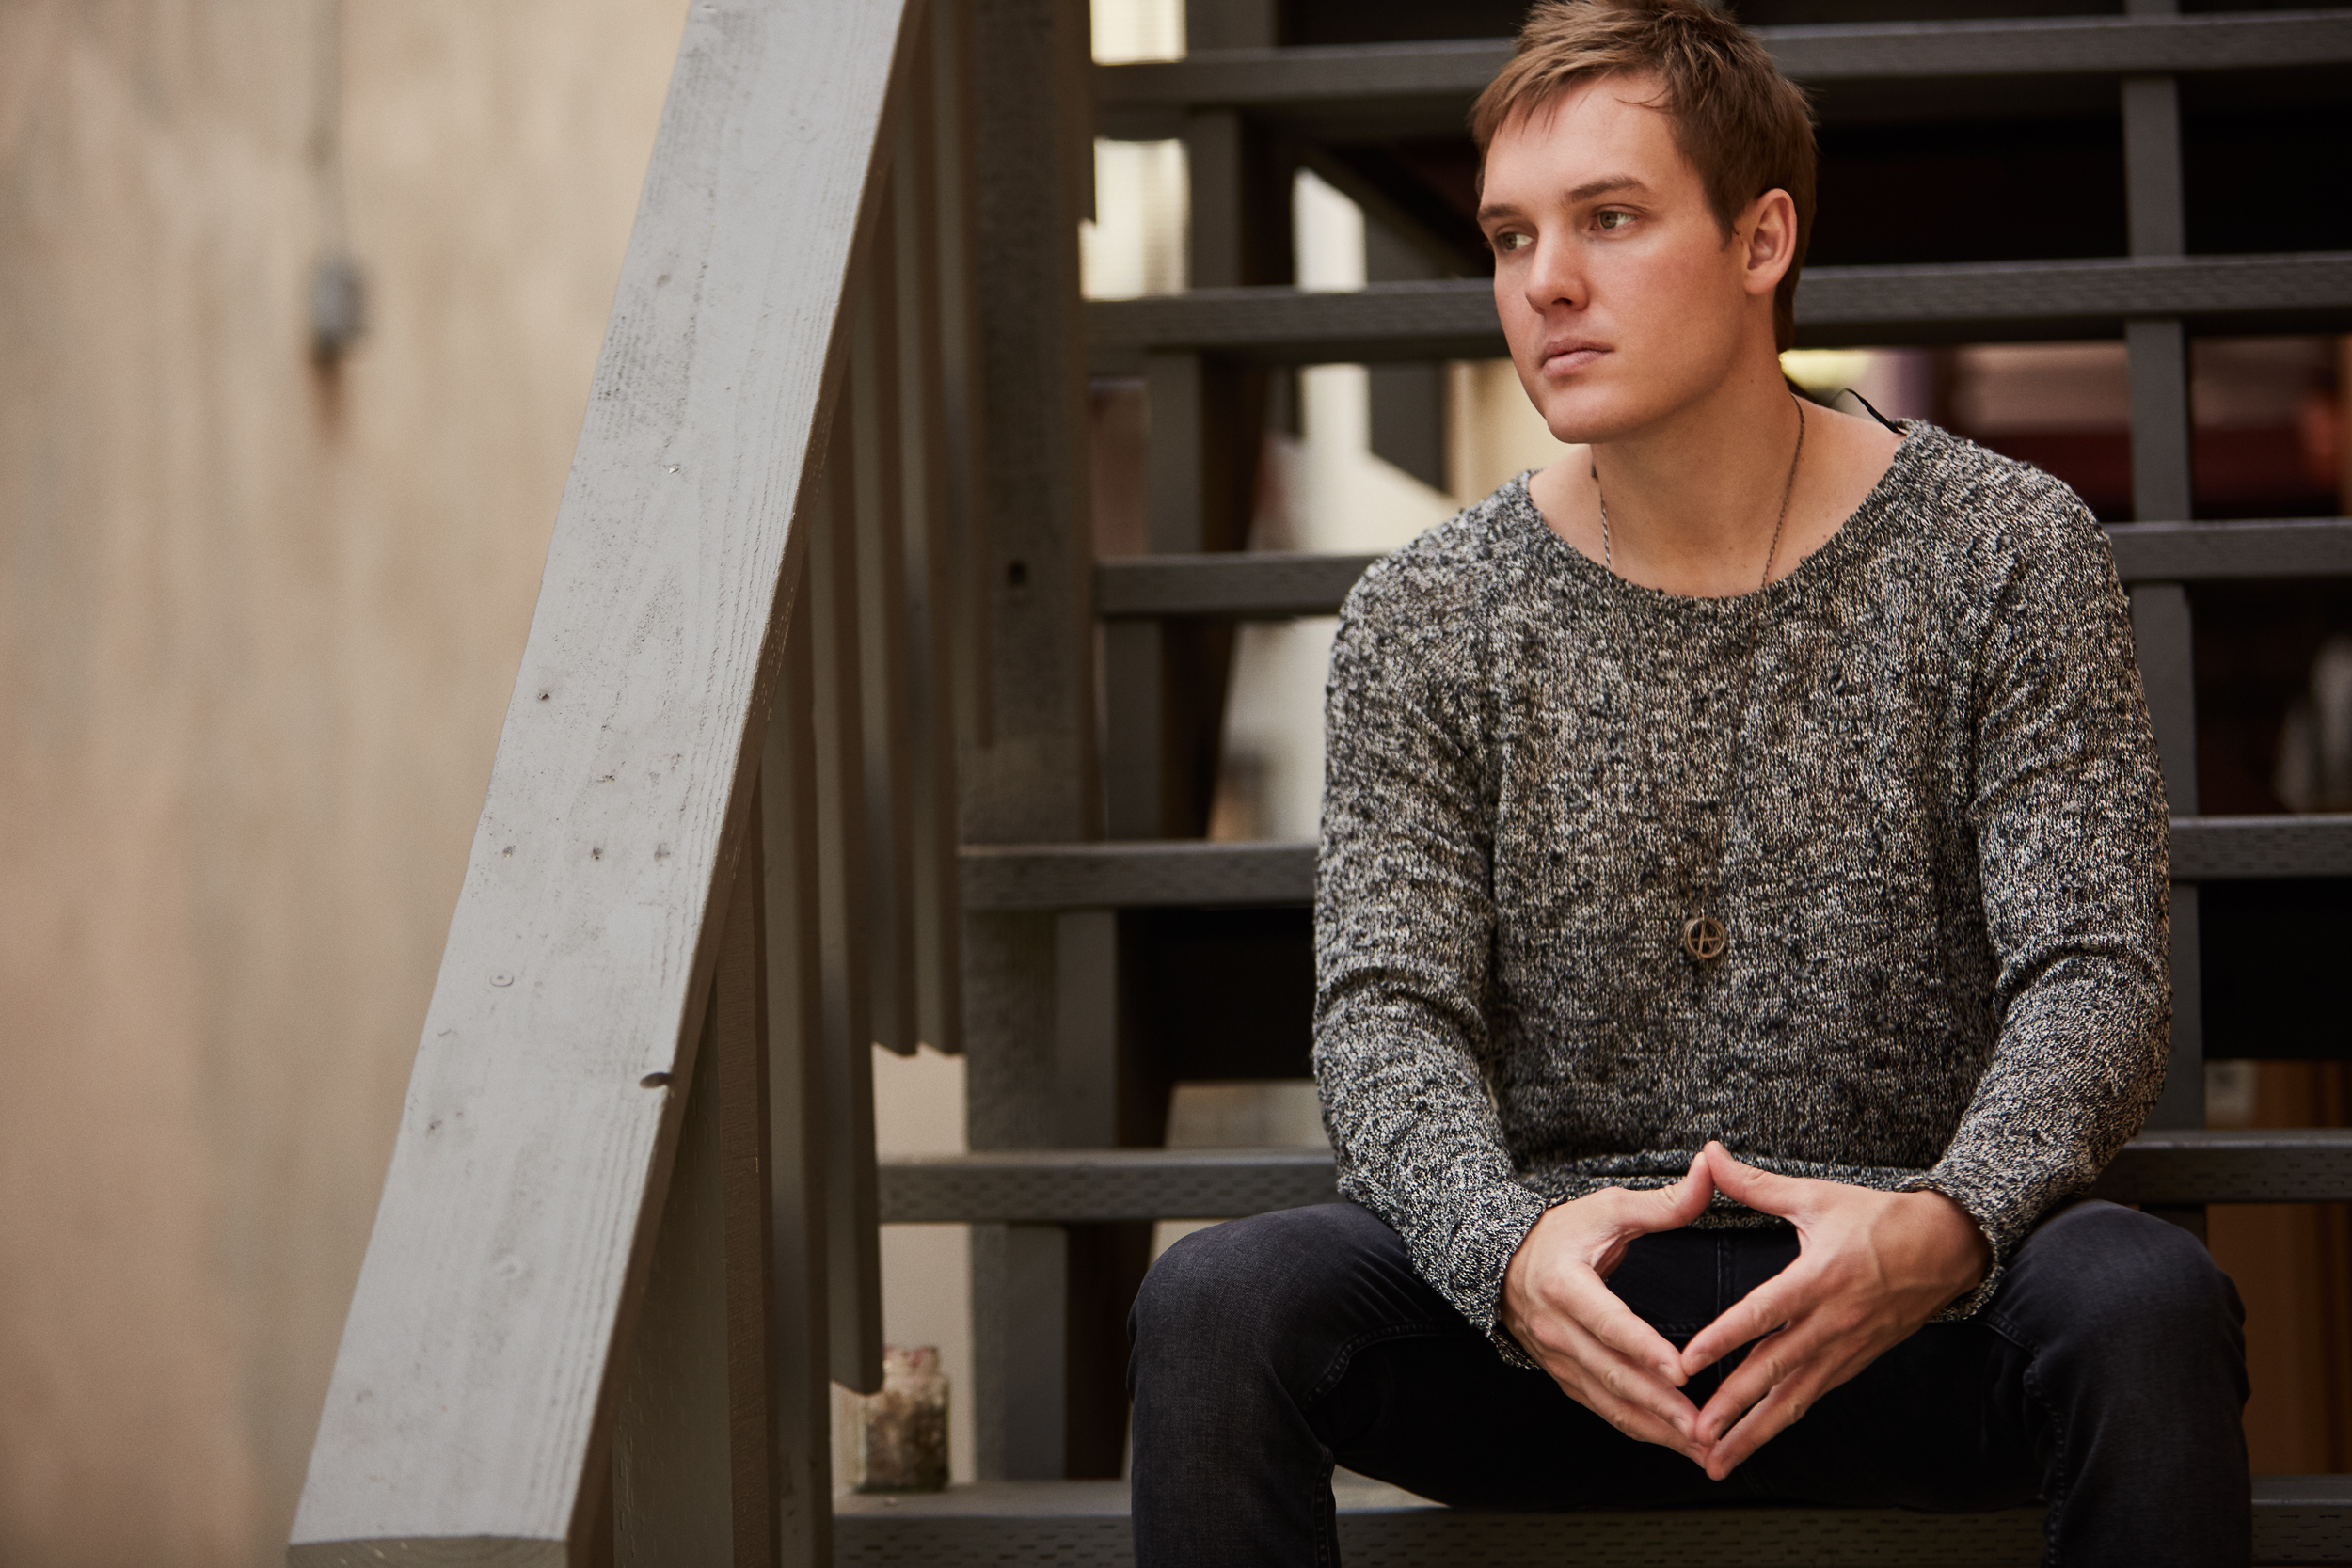 tyDi's Newest Album 'Redefined' Brings A Rollercoaster of Emotions